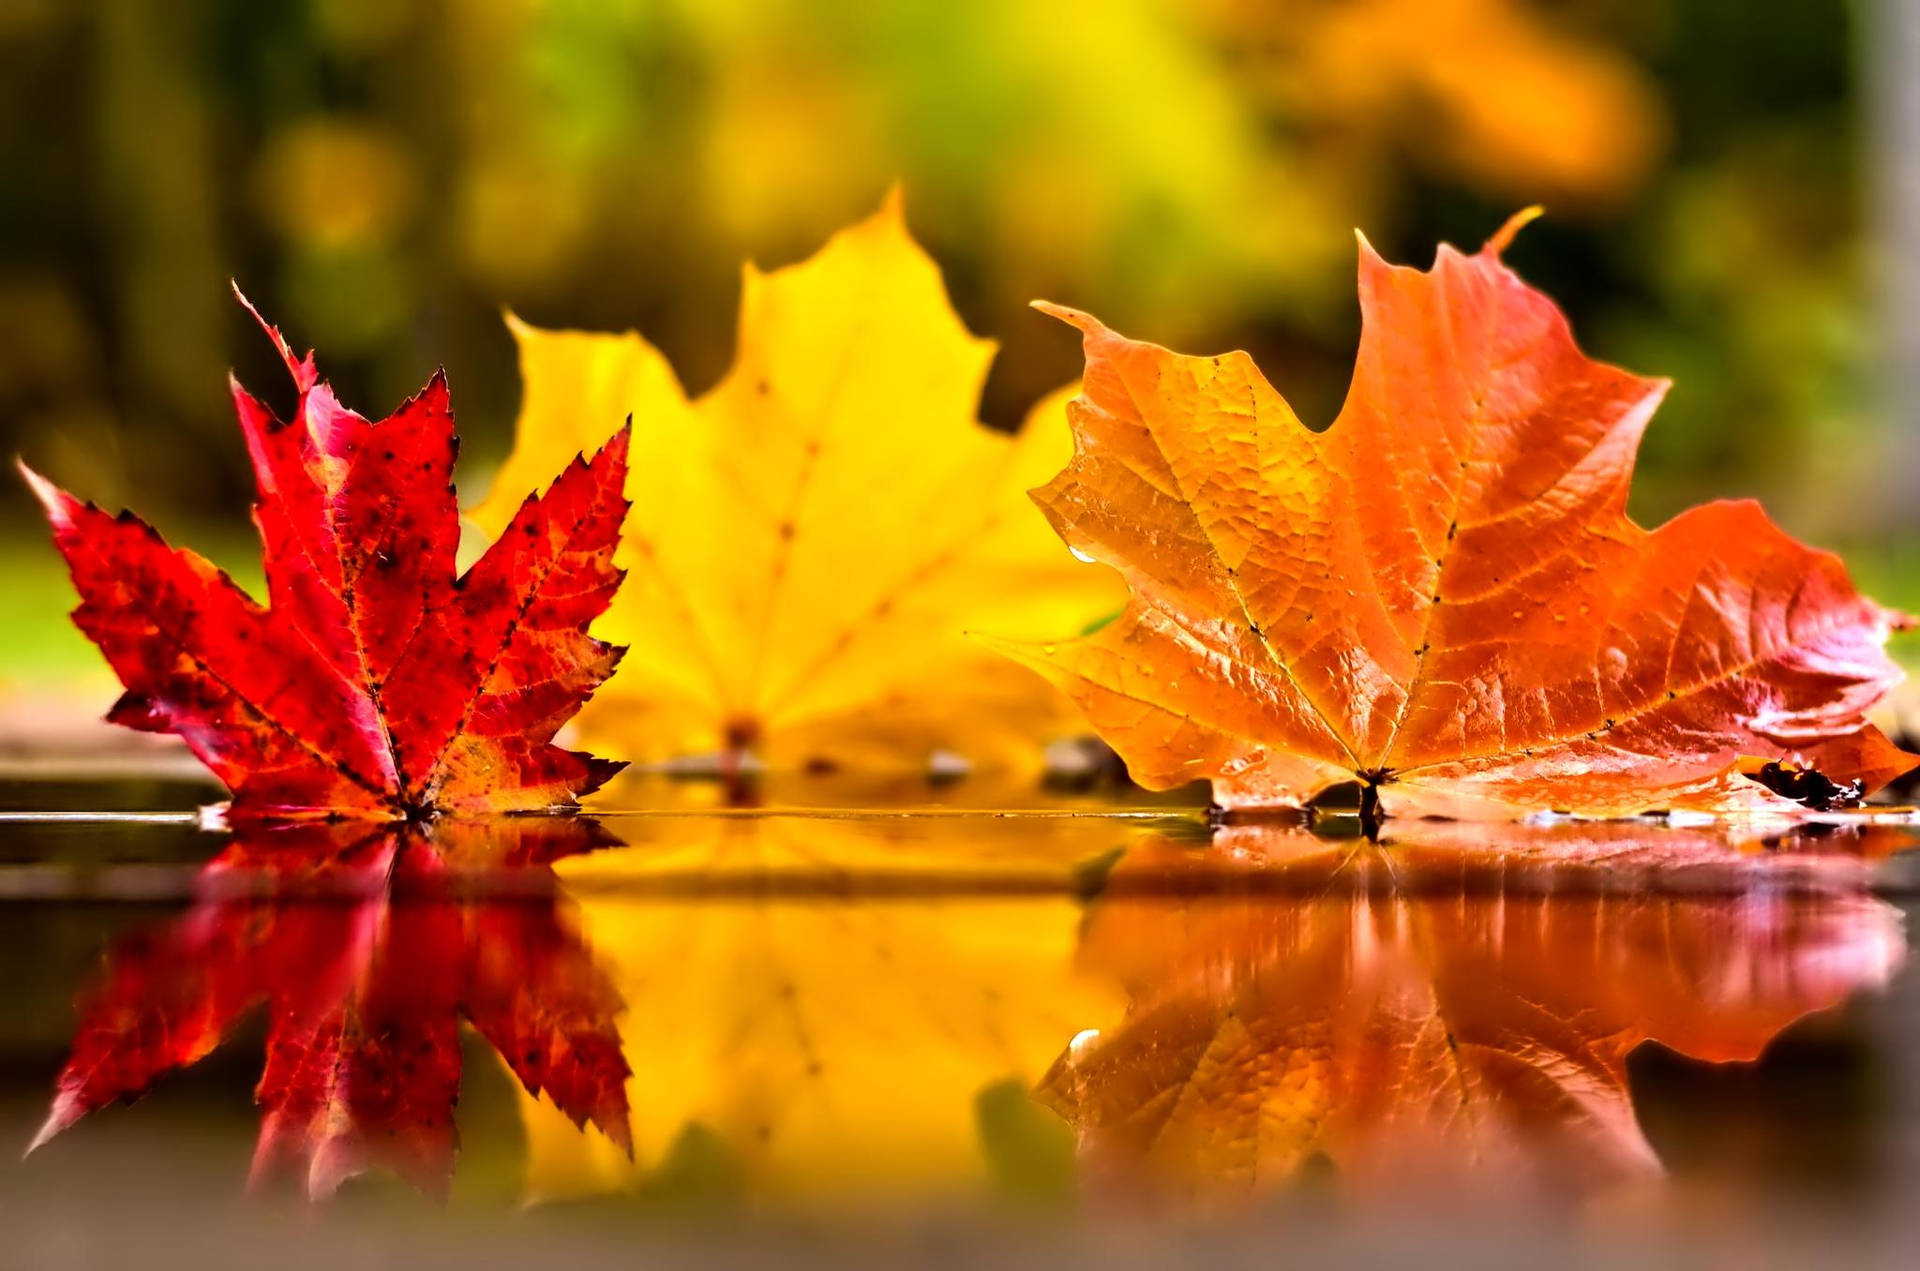 Beautiful bright red and yellow leaves in the autumn season of November Wallpaper